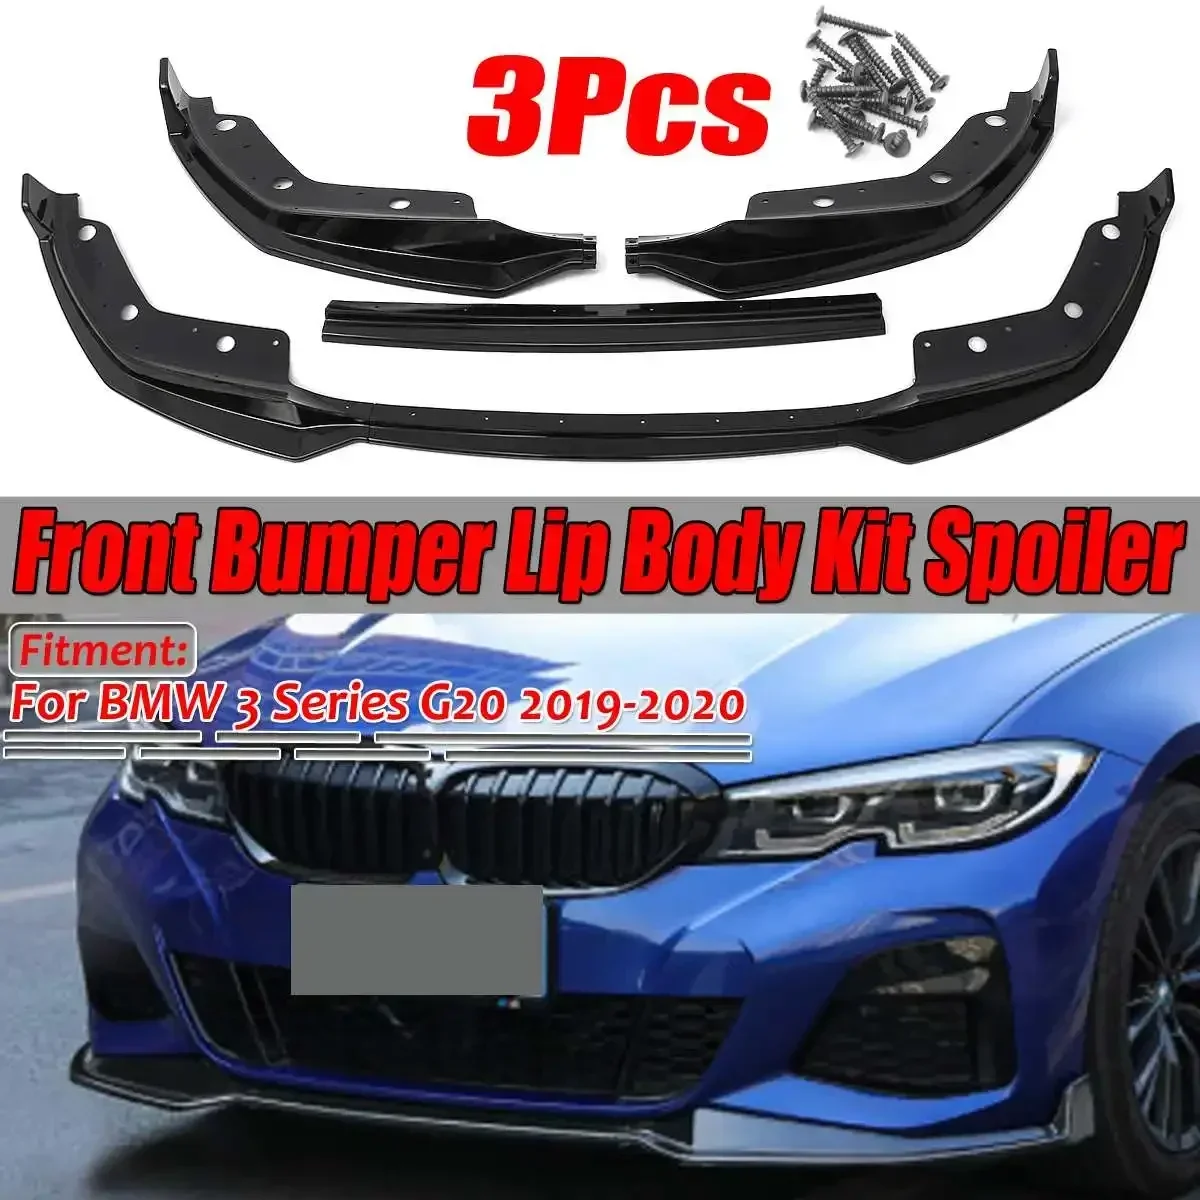 

MP Style 3x Car Front Bumper Lip Spoiler Body Kit Diffuser Spoiler Protector Cover Deflector Lips For BMW 3 Series G20 2019 2020